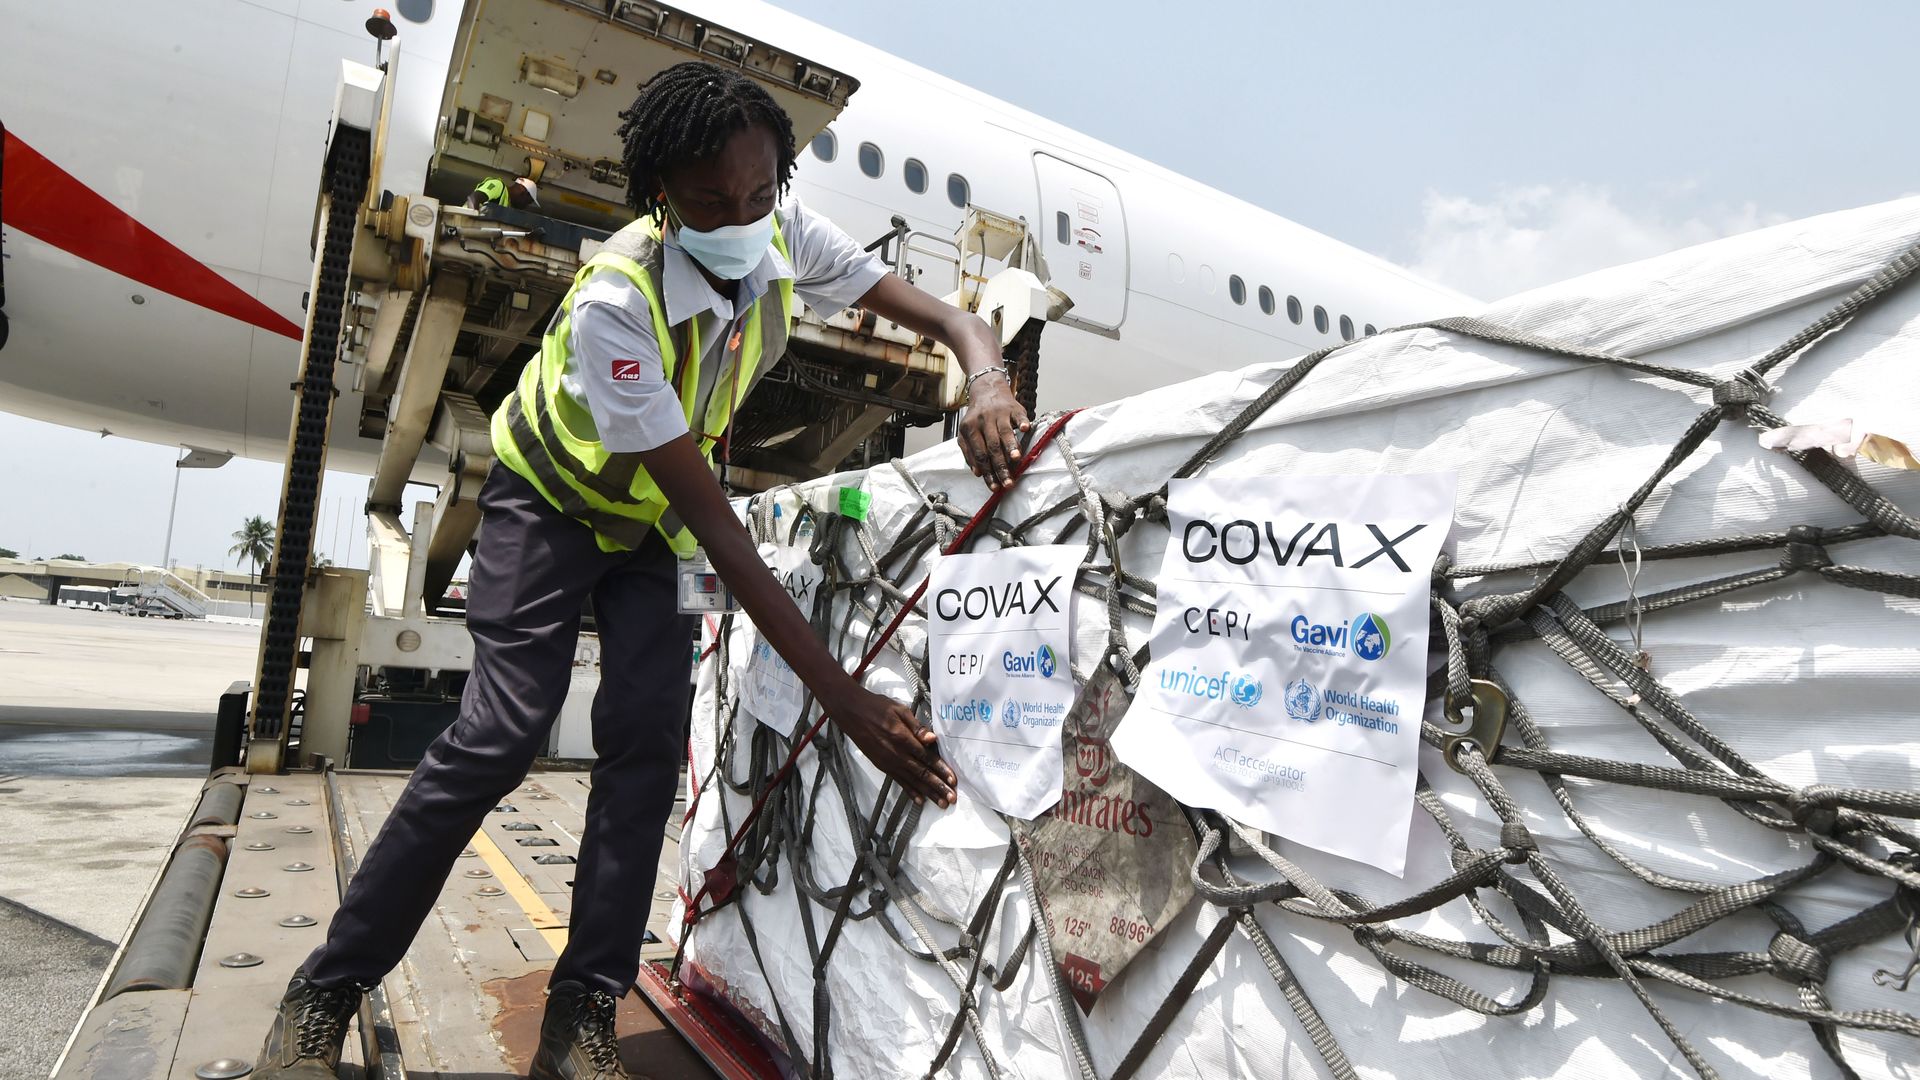 A person unloading a shipment of AstraZeneca Covid-19 vaccine from a plane in Abidjan, Côte d'Ivoire, in February 2021.